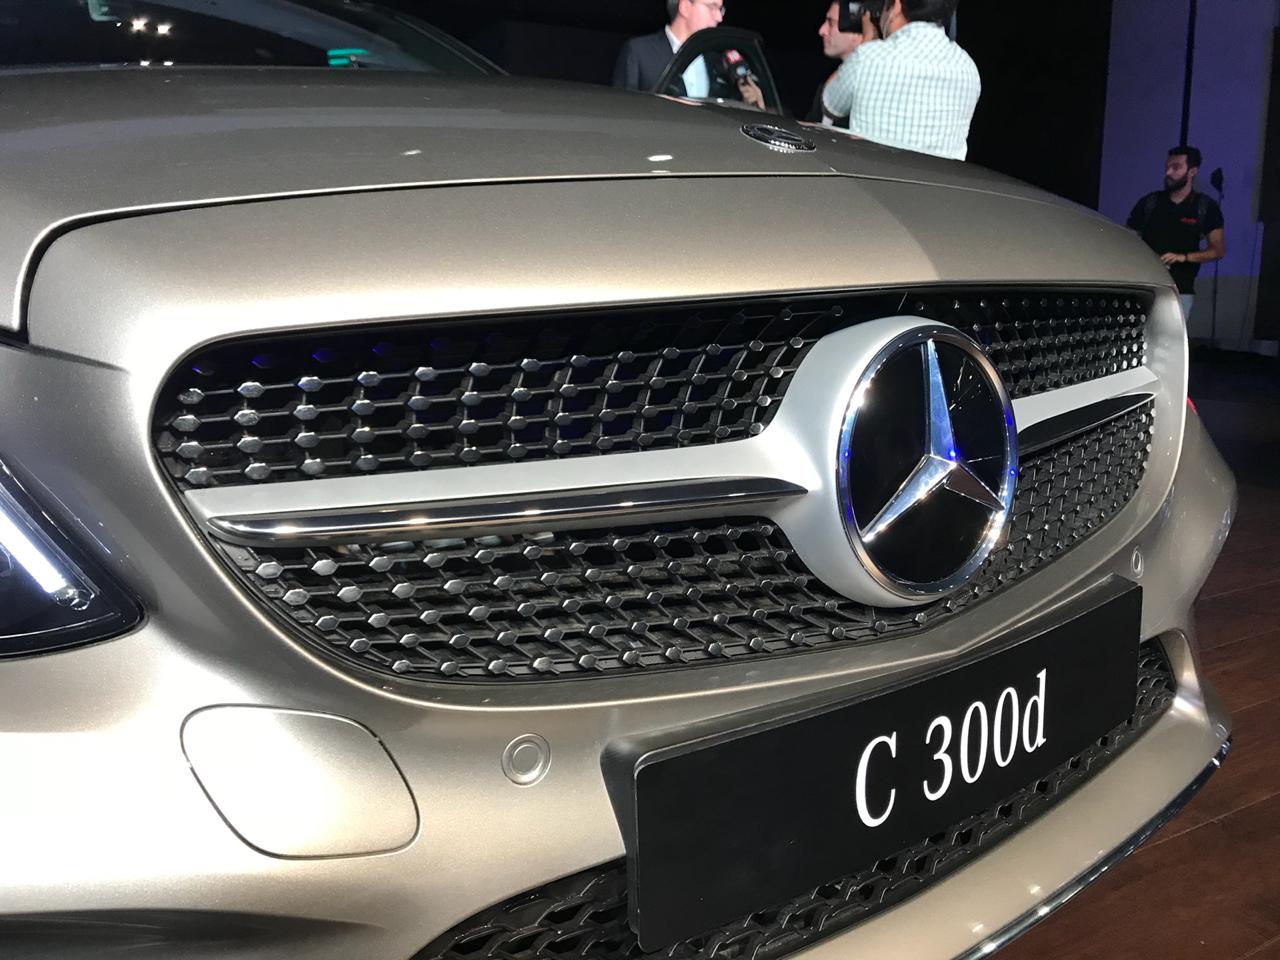 <p>Interestingly, Mercedes-Benz&nbsp;is NOT launching petrol engined versions of the C-Class today. Only the diesel engined versions, the C 220d and C 300d have been launched.&nbsp;</p>